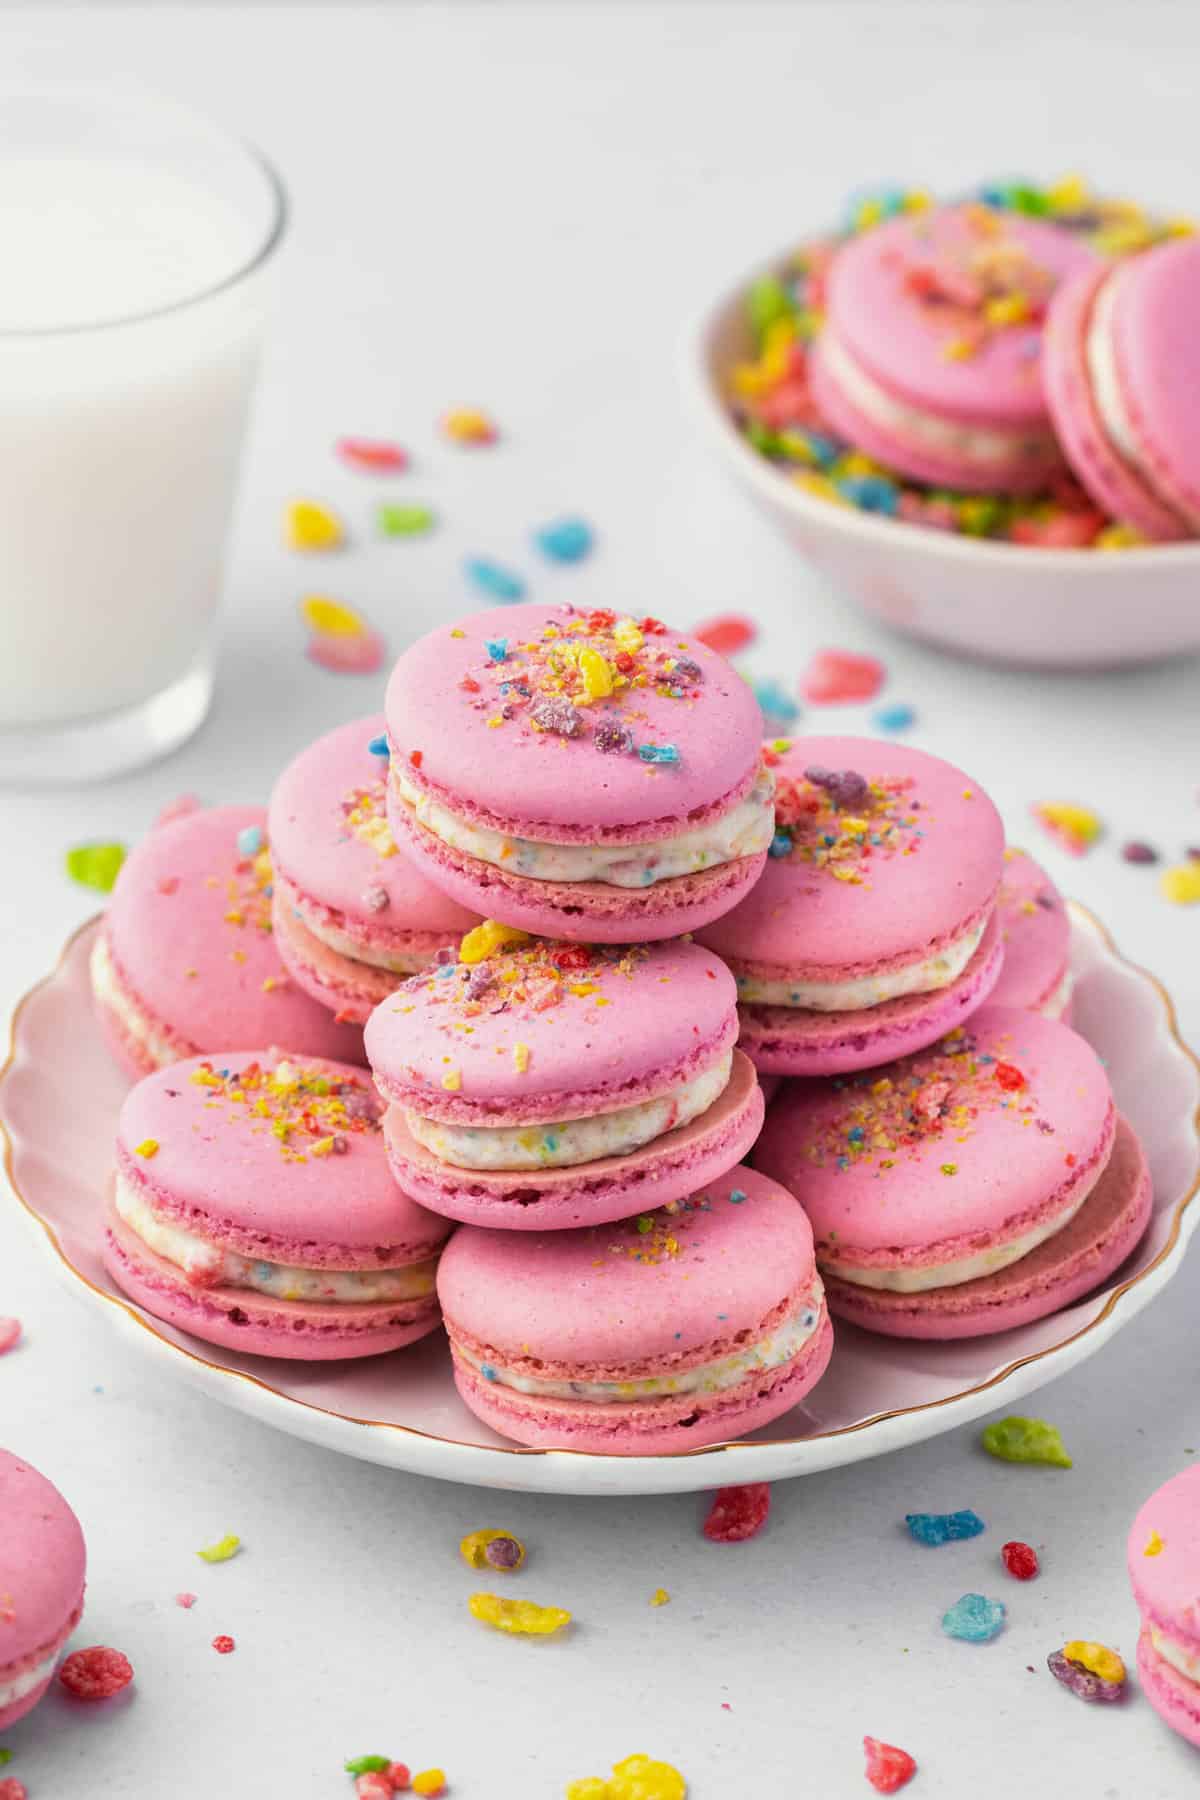 A plate of fruity pebbles macarons.